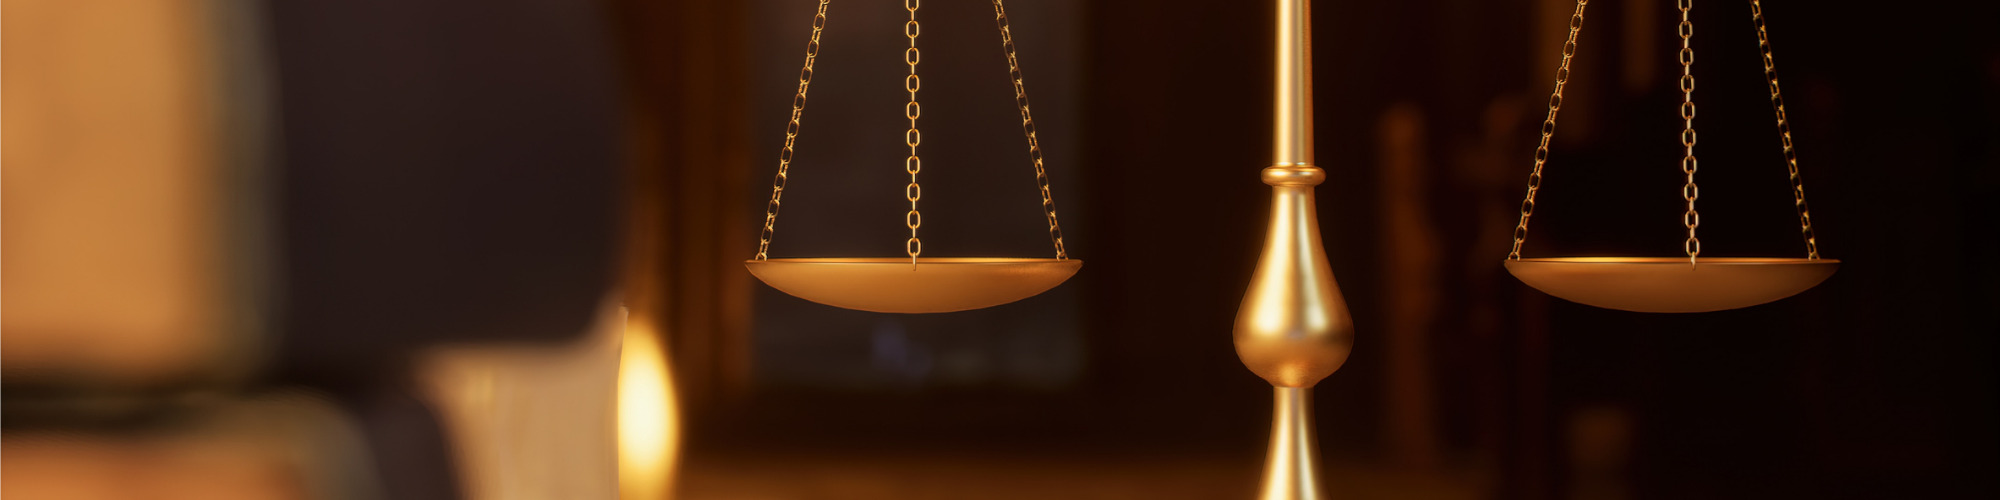 Court of Protection Costs - Lessons Learned from Recent Case Law